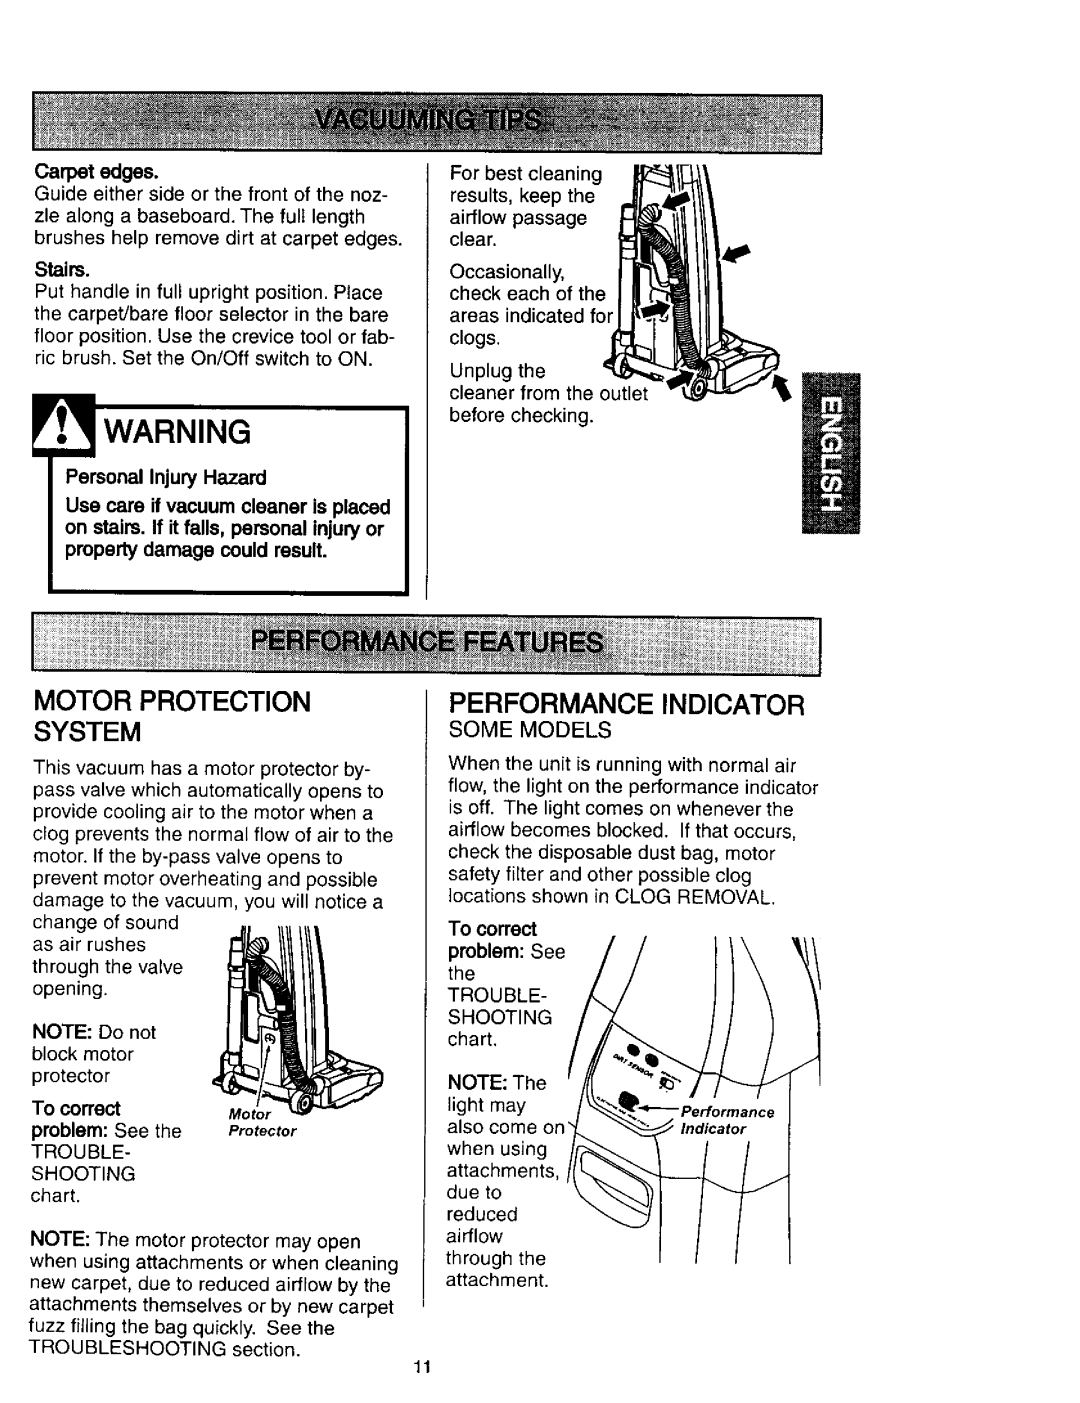 Kenmore 116.34613, 116.31613, 632, 631 Motor Protection System, Performance Indicator, Personal Injury Hazard, Stairs, chart 